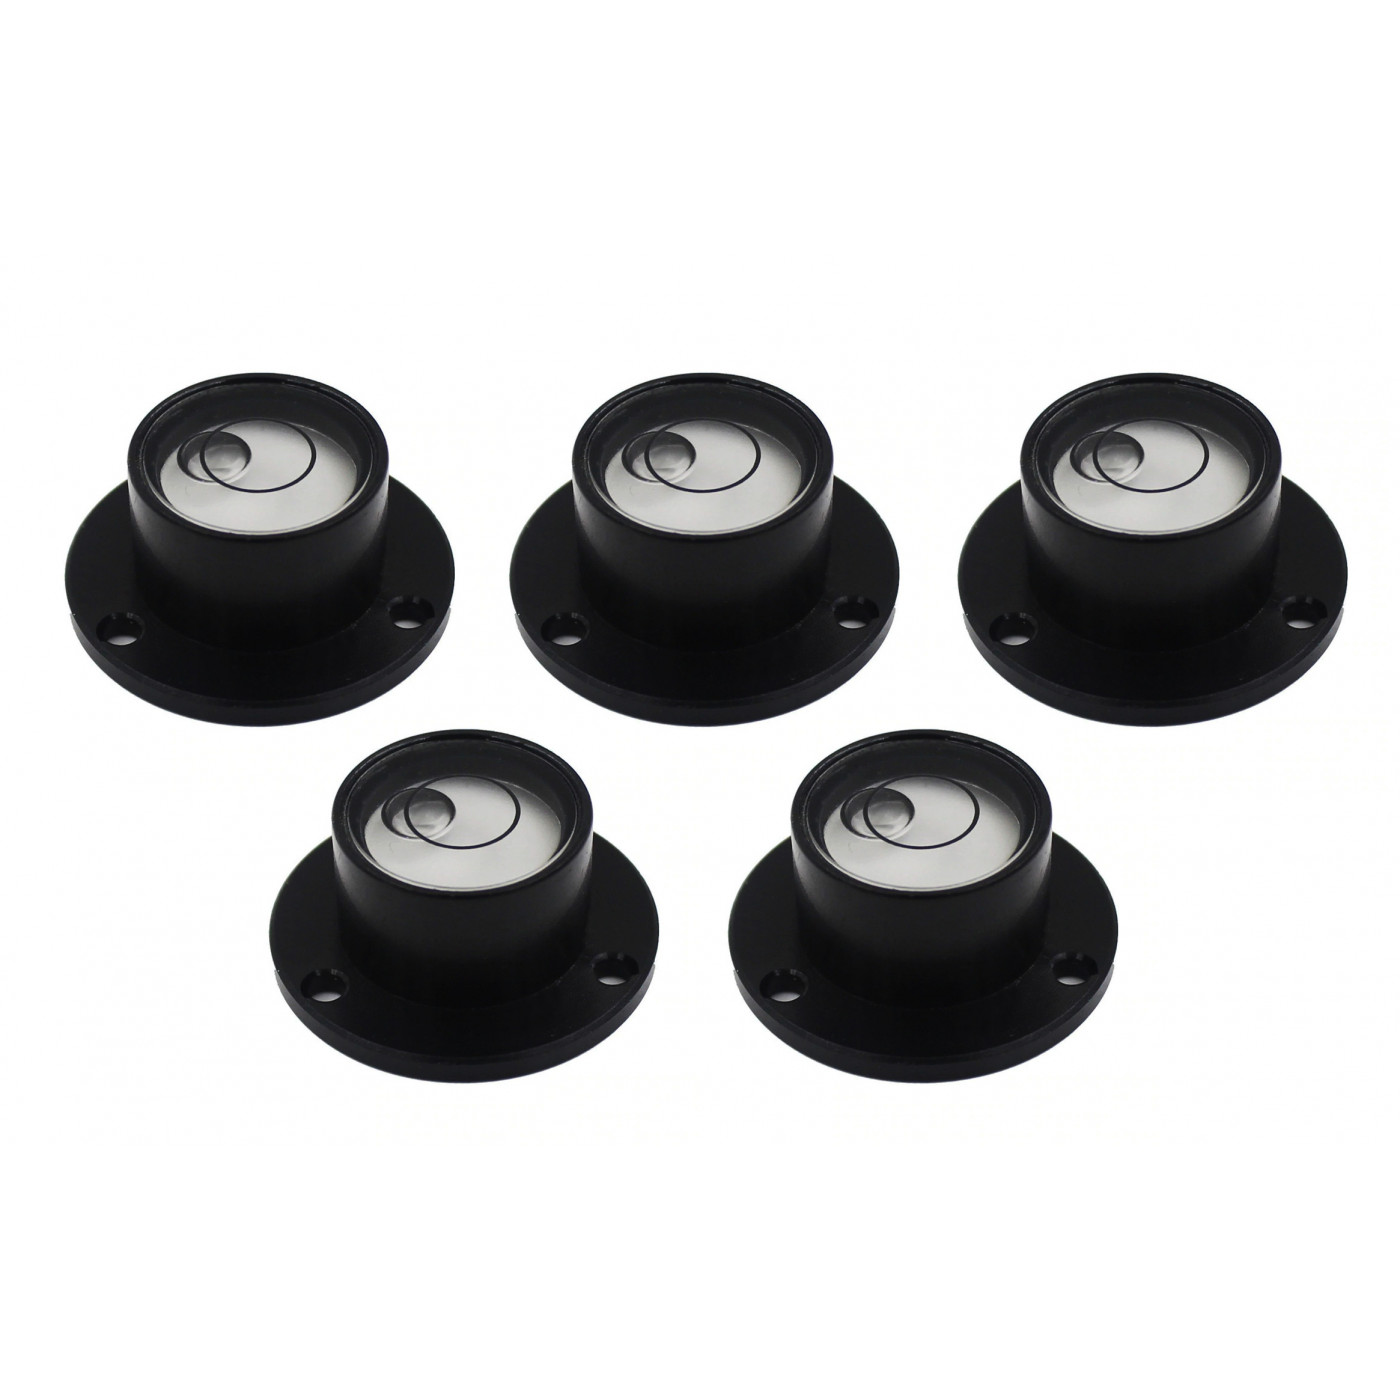 Set of 5 round bubble levels with metal shell (black)